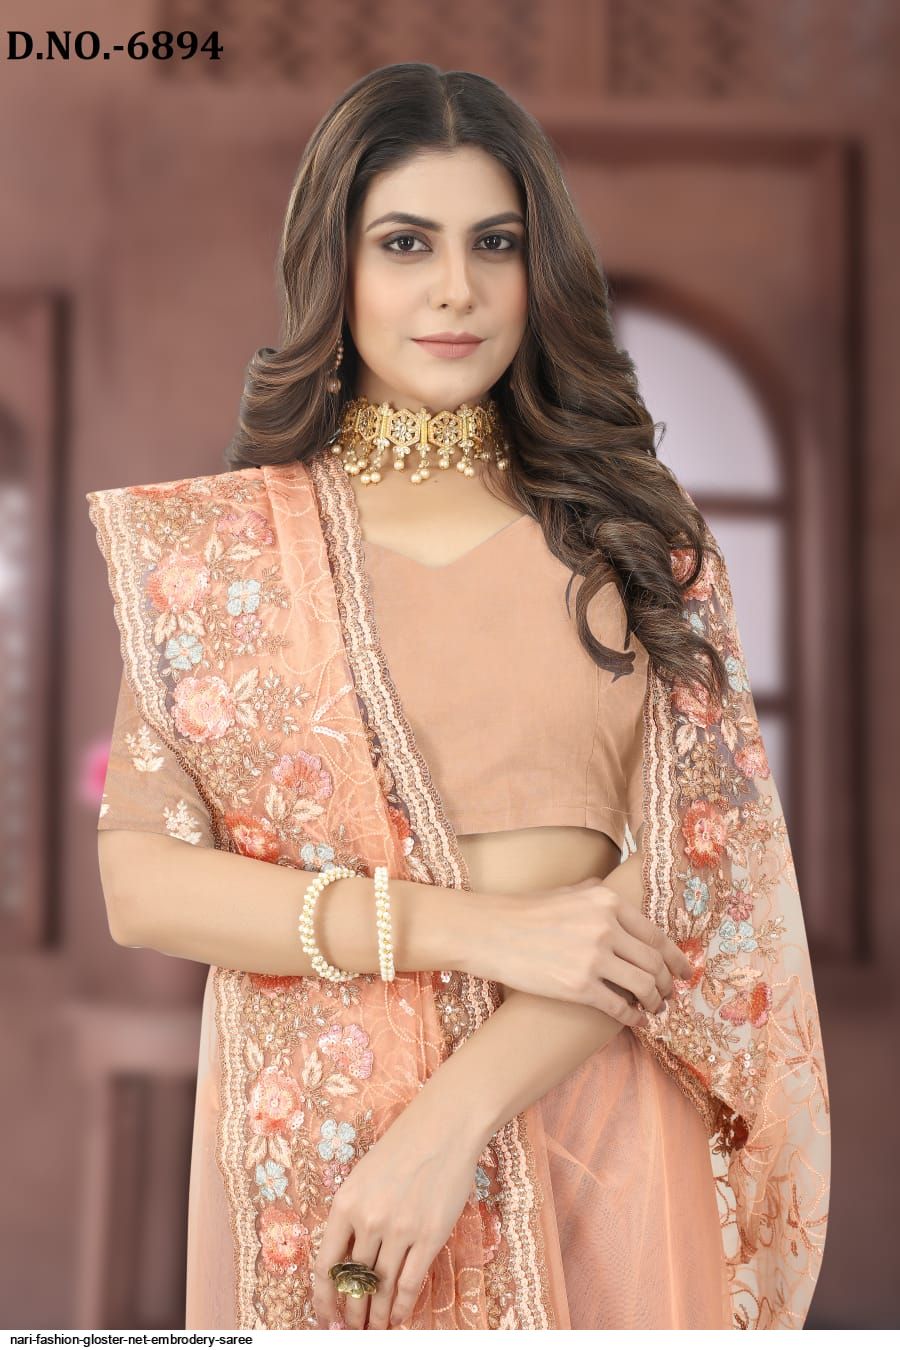 Baby Pink Colour Gloster By Nari Fashion Party Wear Saree Catalog 6892 -  The Ethnic World